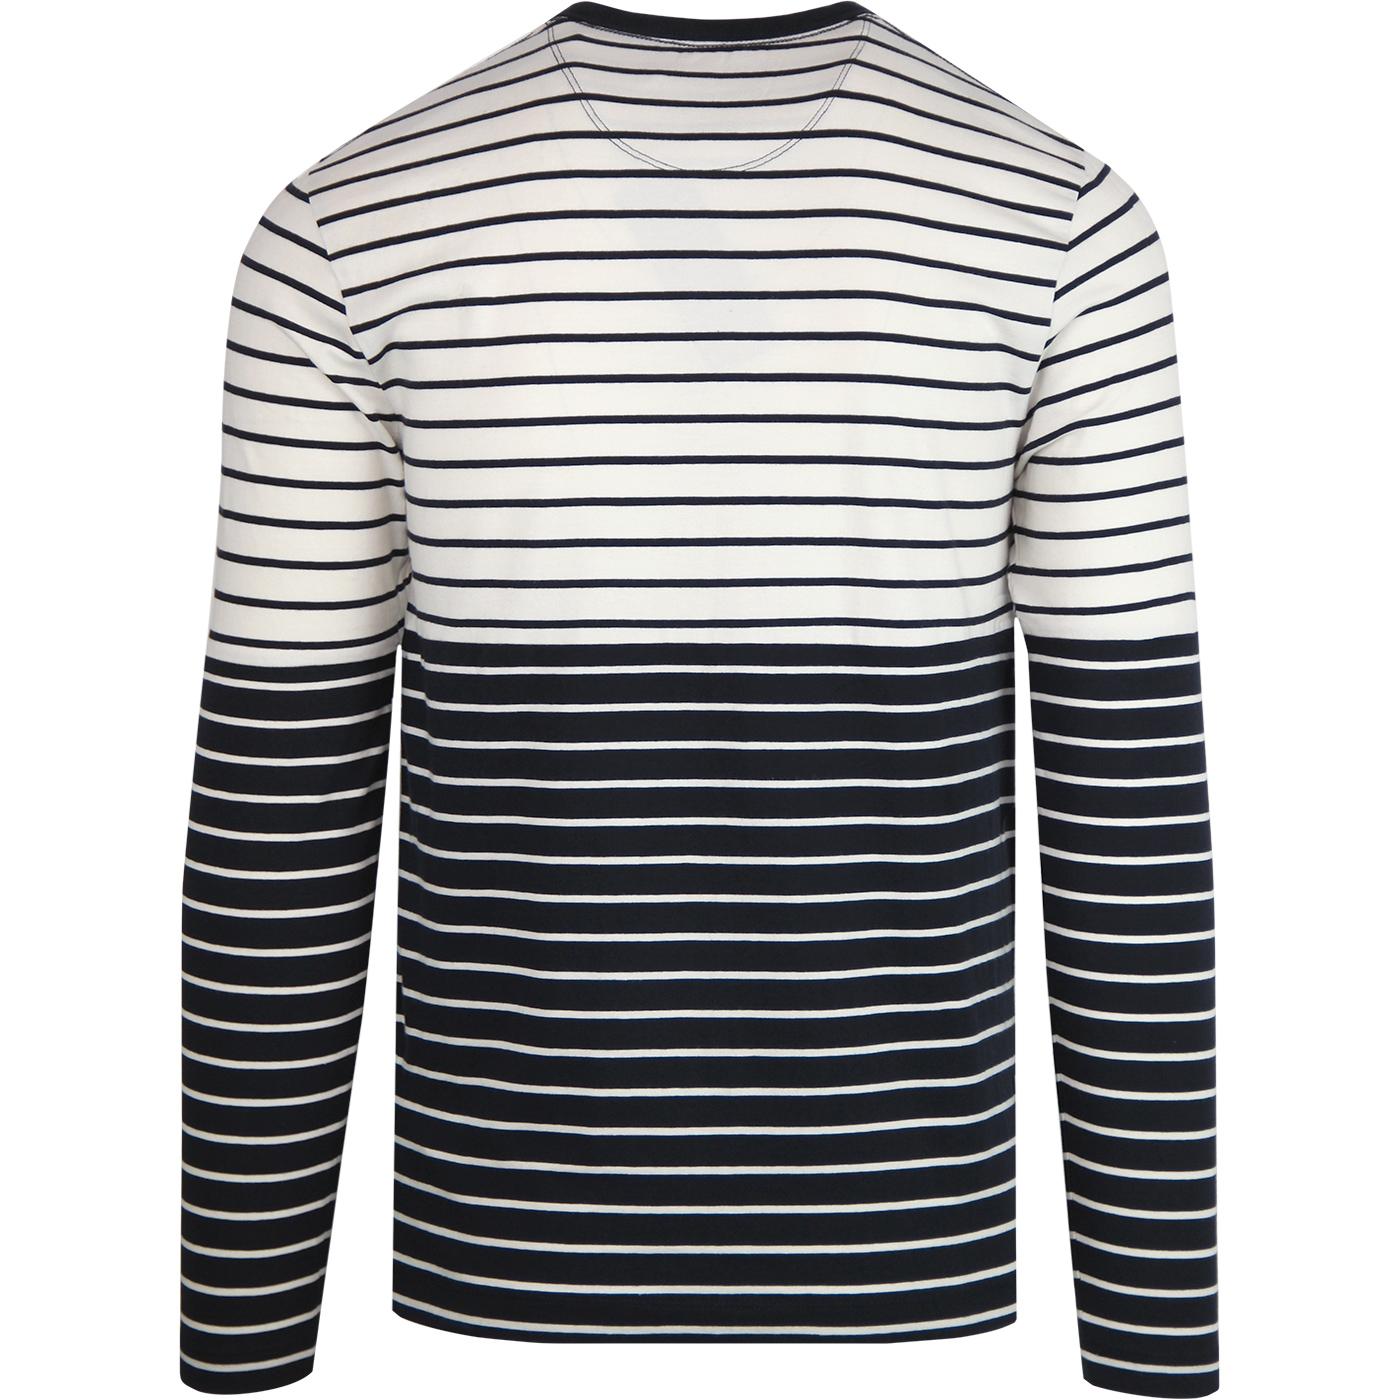 FRENCH CONNECTION Retro Mod Stripe Long Sleeve T-Shirt